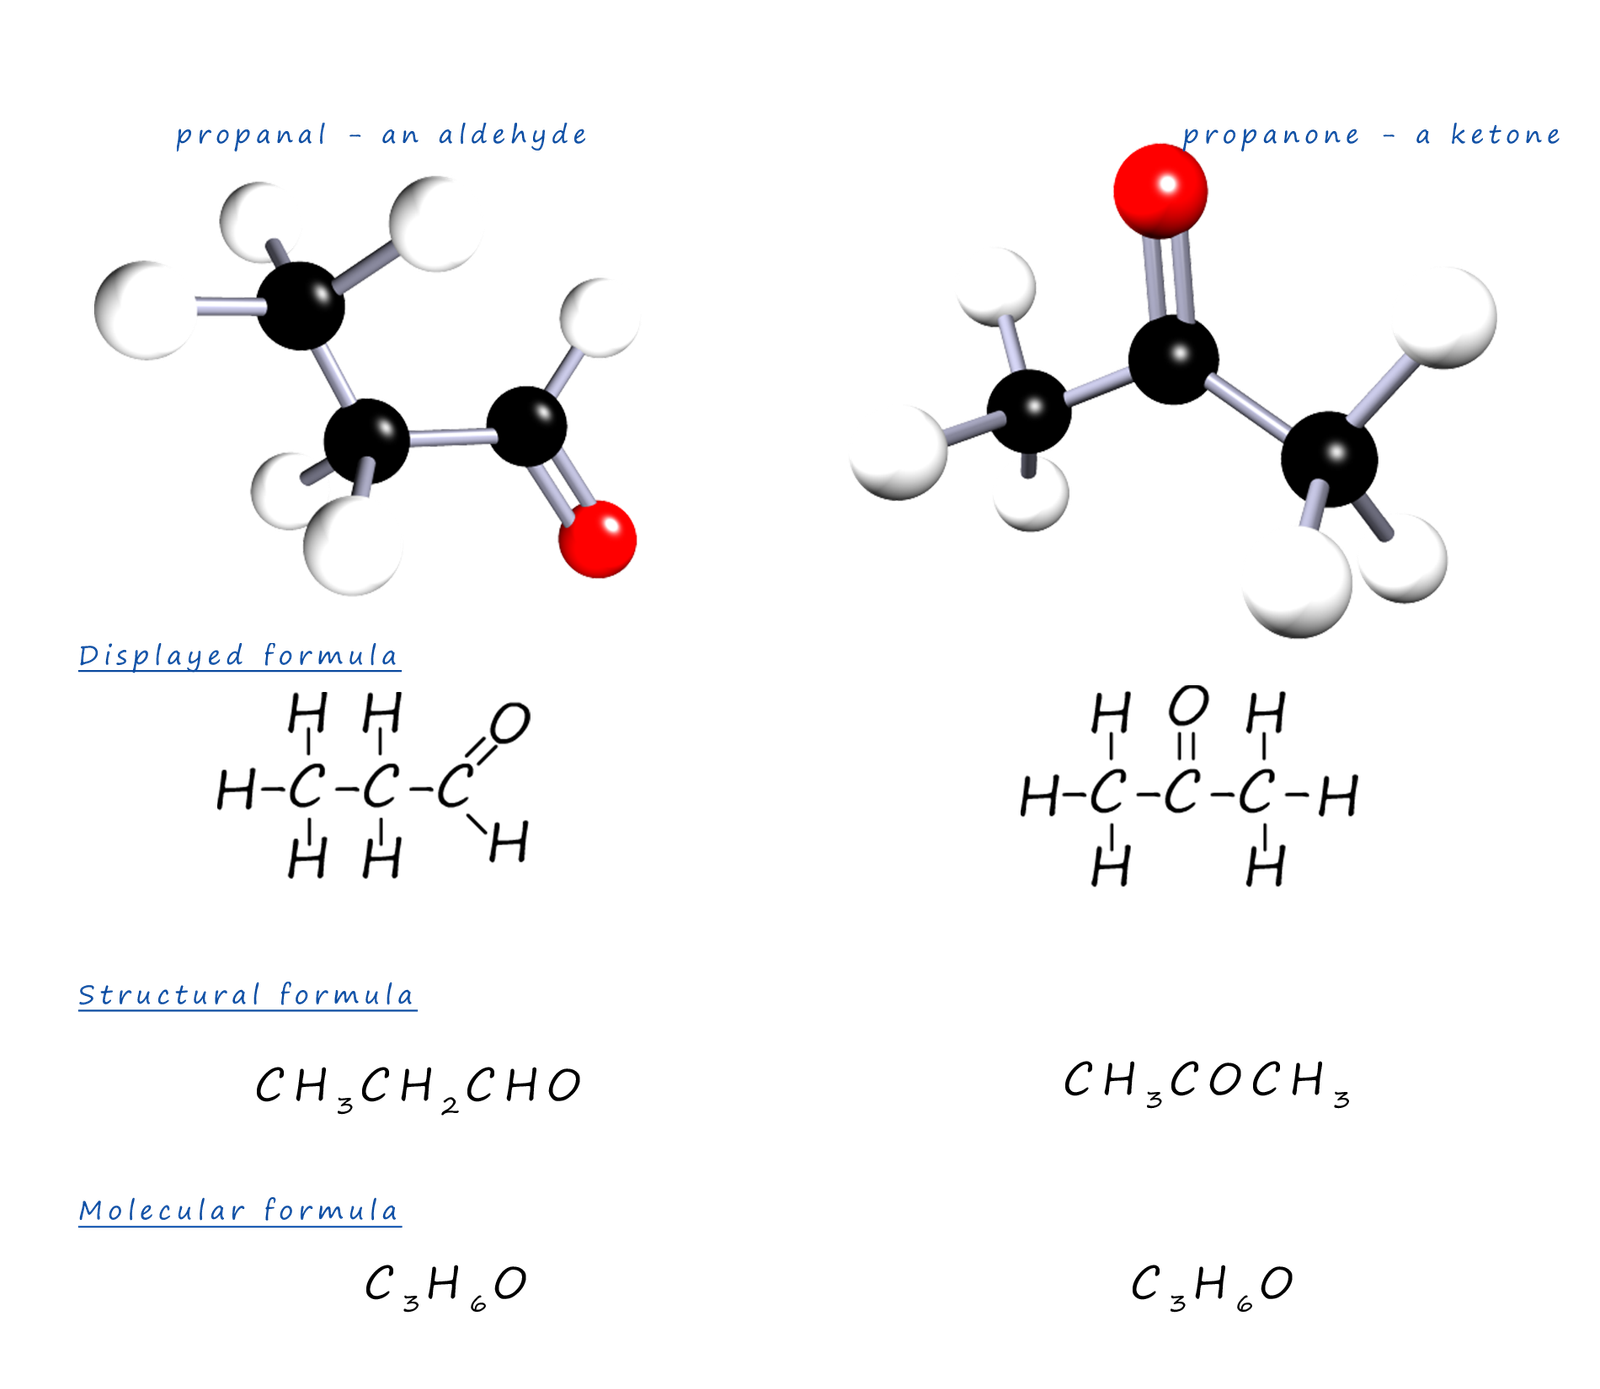 3d models of functional group isomers, using propanone and propanal as examples.